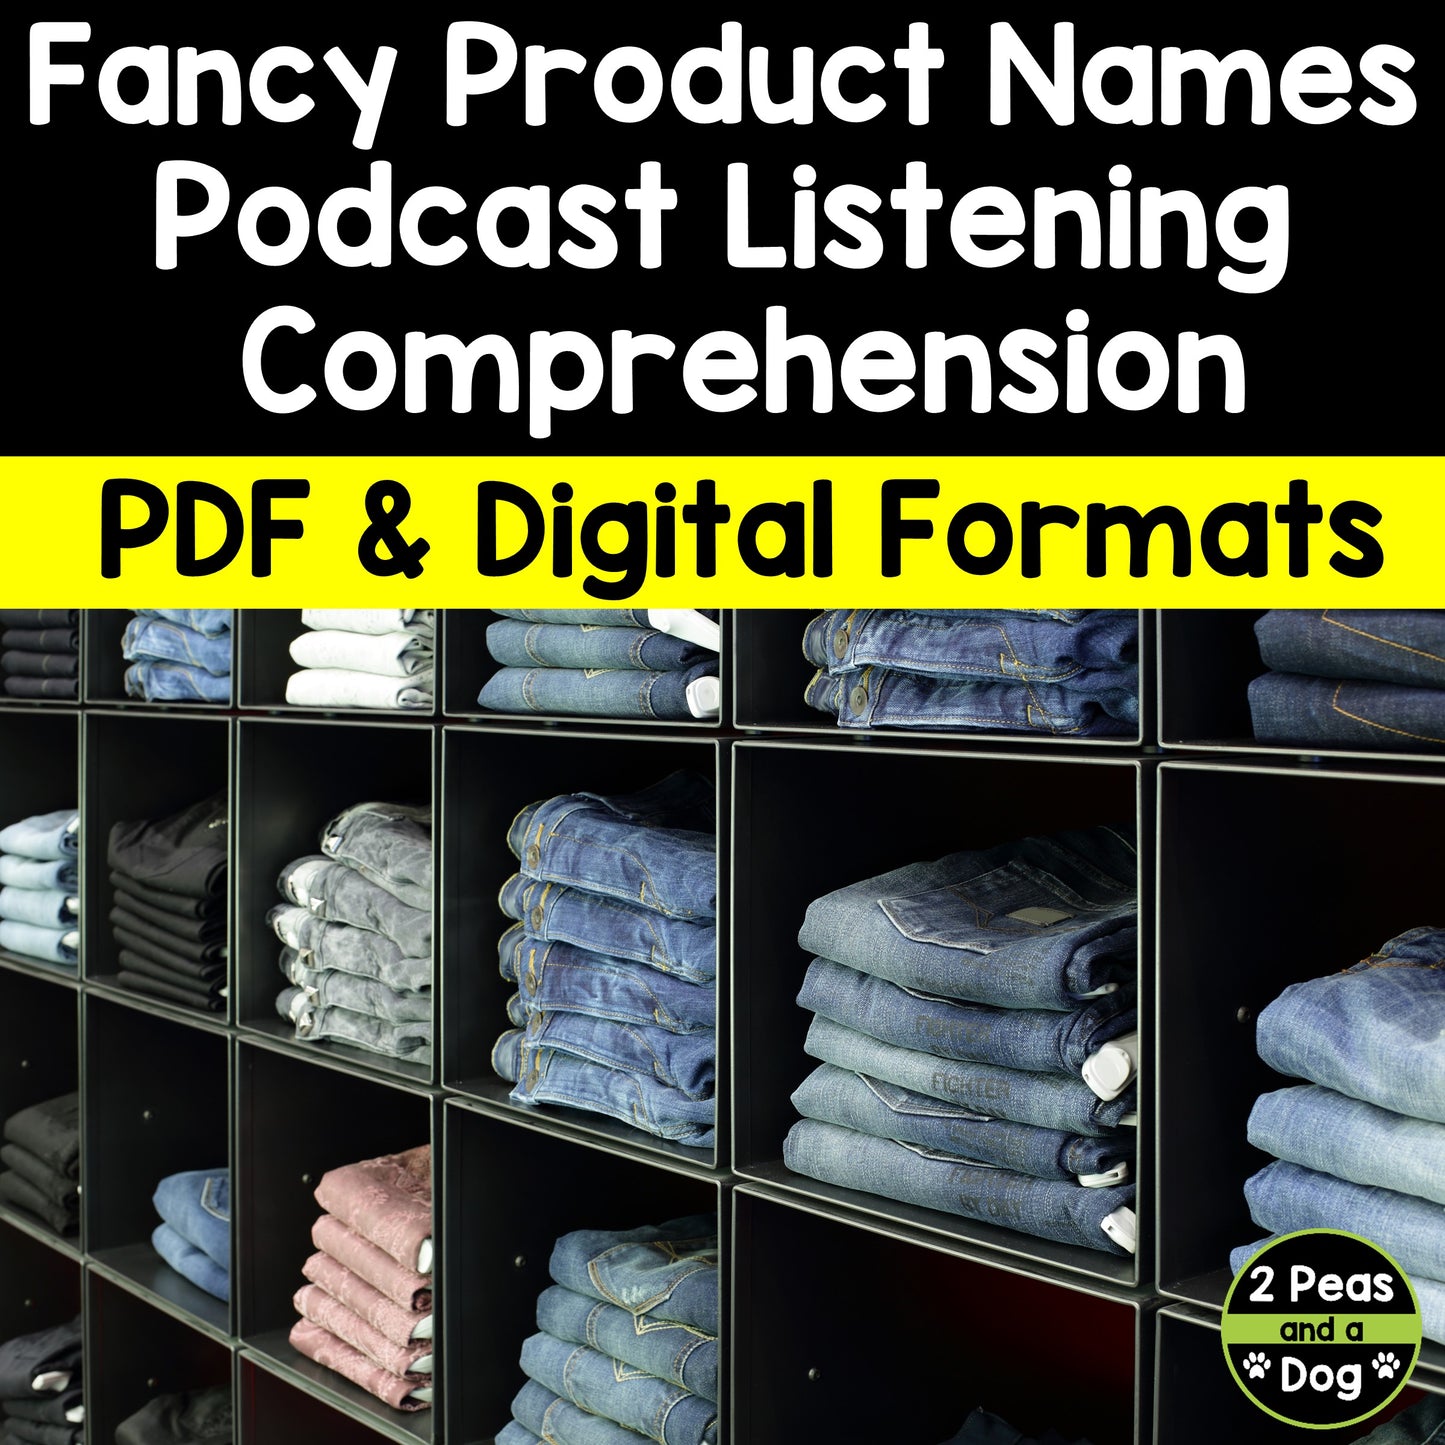 Podcast Listening Comprehension Lesson - Fancy Product Names